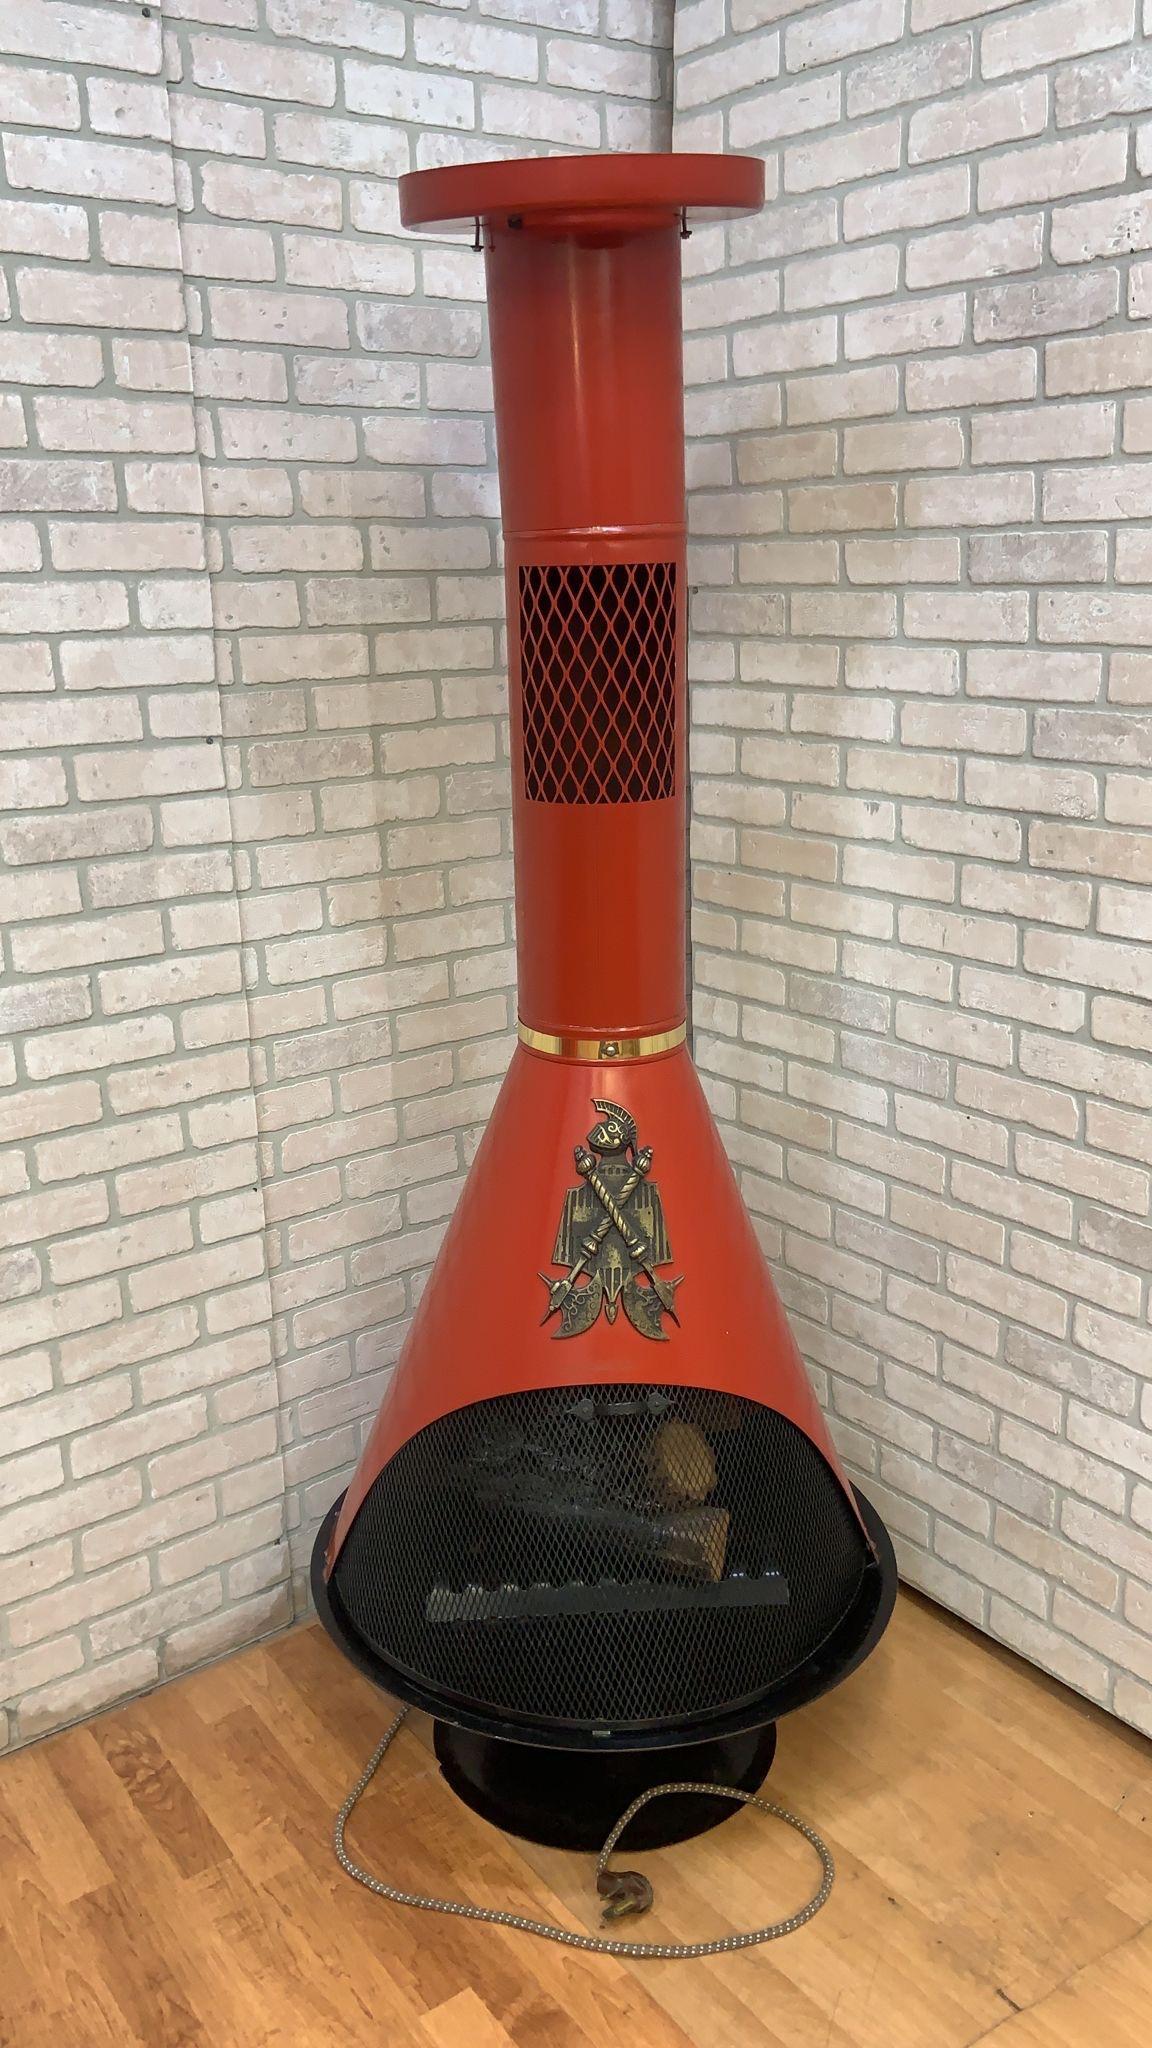 Mid Century Modern Freestanding Electric Cone Fireplace in Red  - Indoor/Outdoor 

Circa 1960

Dimensions:
H: 73”
W: 31”
D: 31”